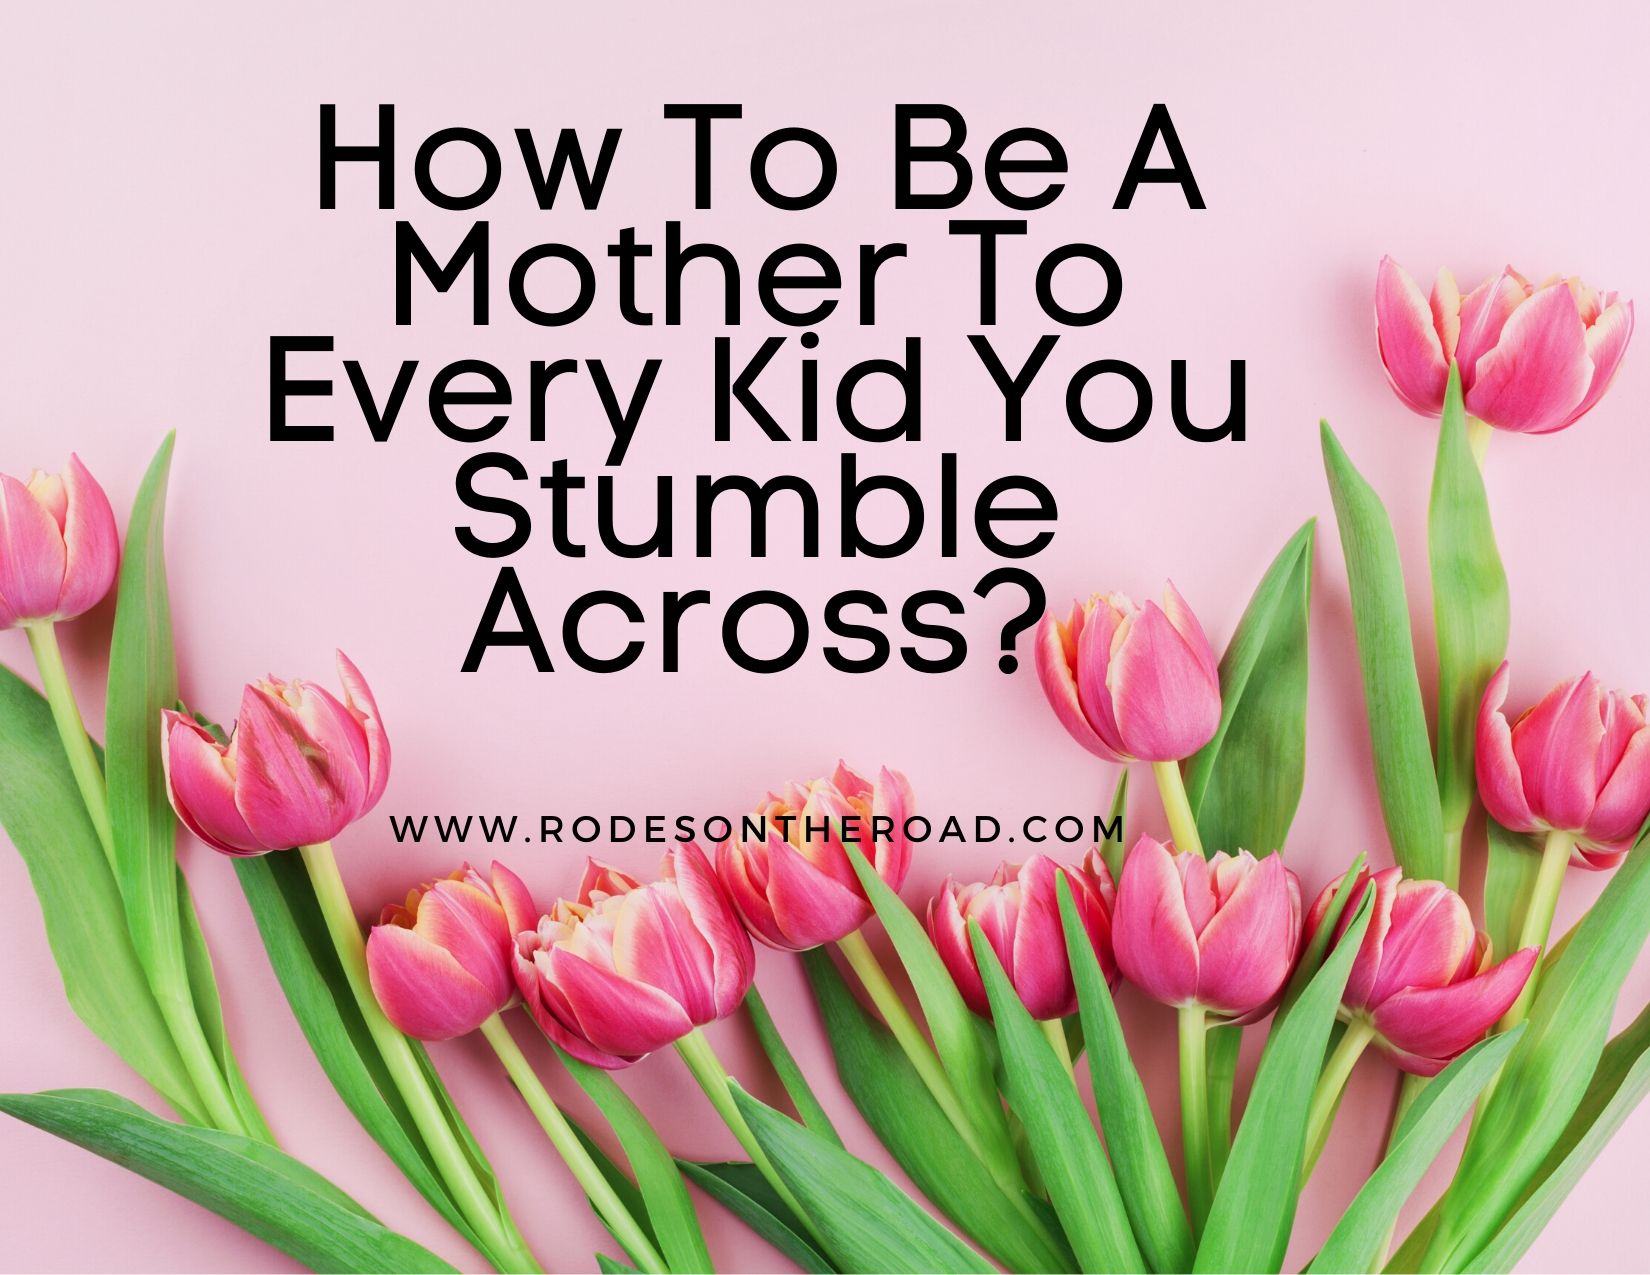 How To Be A Mother To Every Kid You Stumble Across?